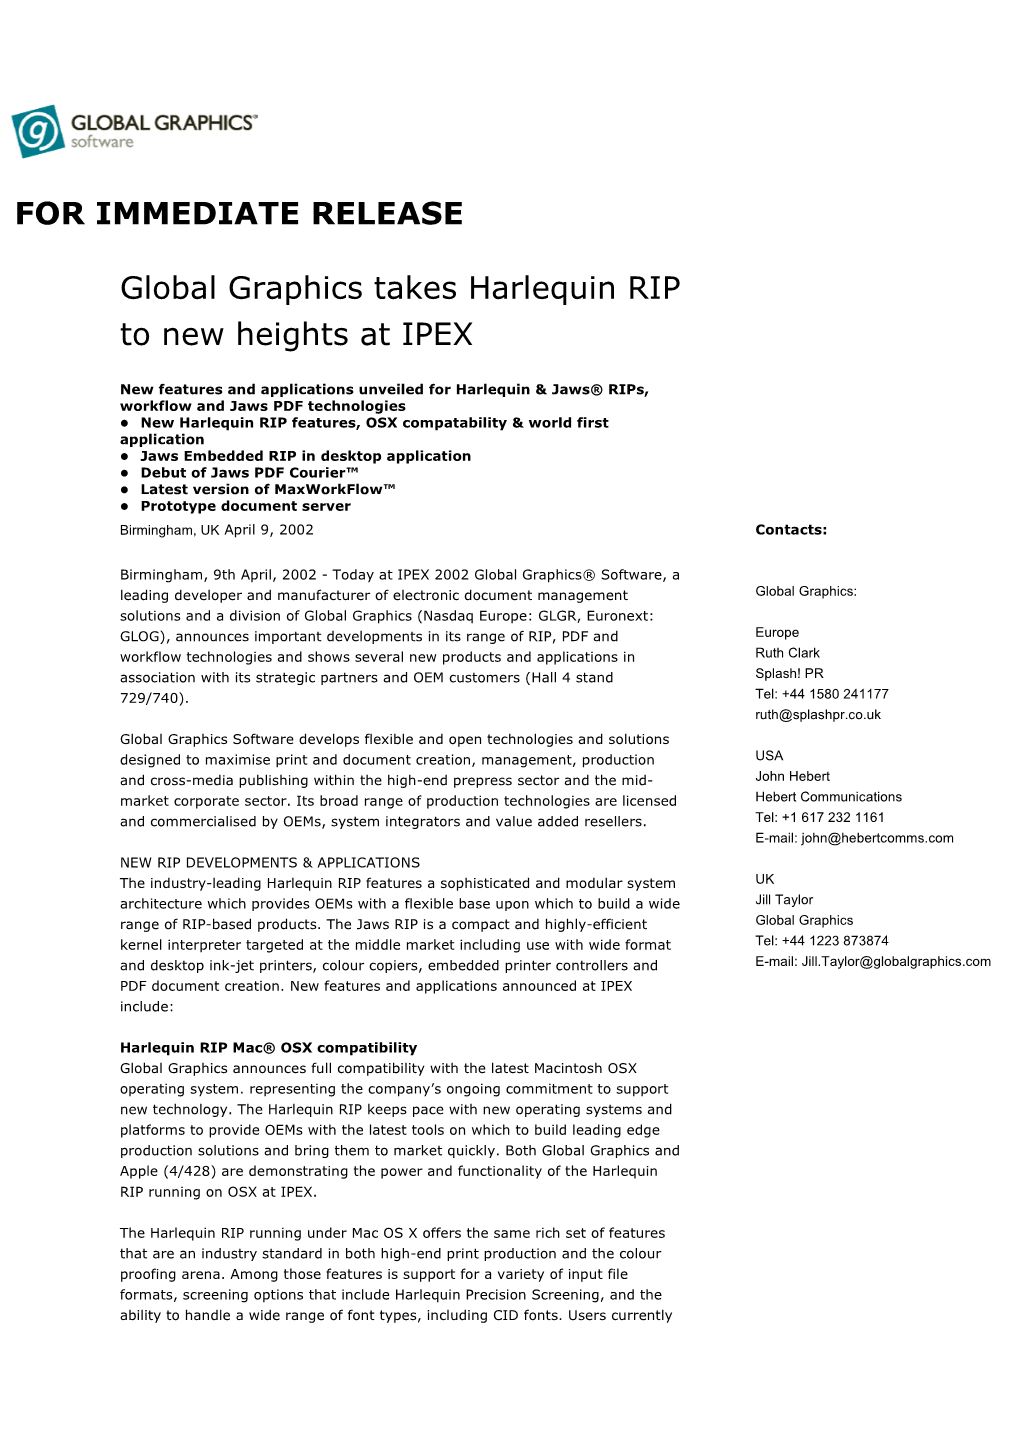 FOR IMMEDIATE RELEASE Global Graphics Takes Harlequin RIP To